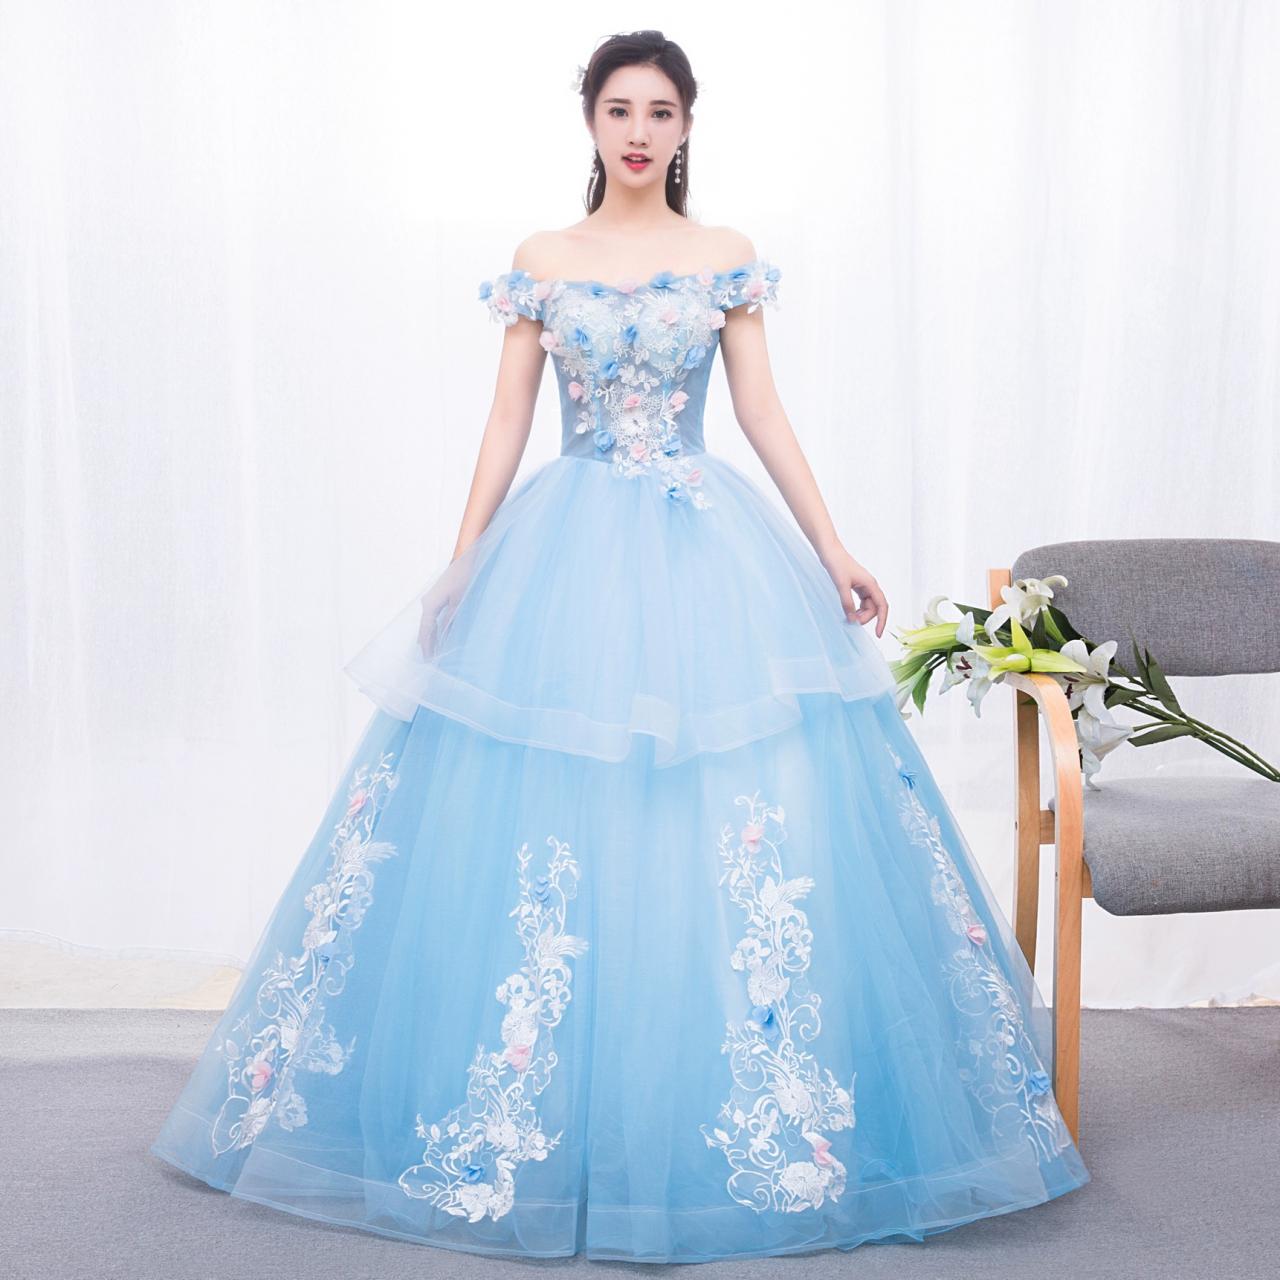 Glam Blue Ball Gown Tulle With Lace And Flowers Sweet 16 Dress, Blue Formal Dress